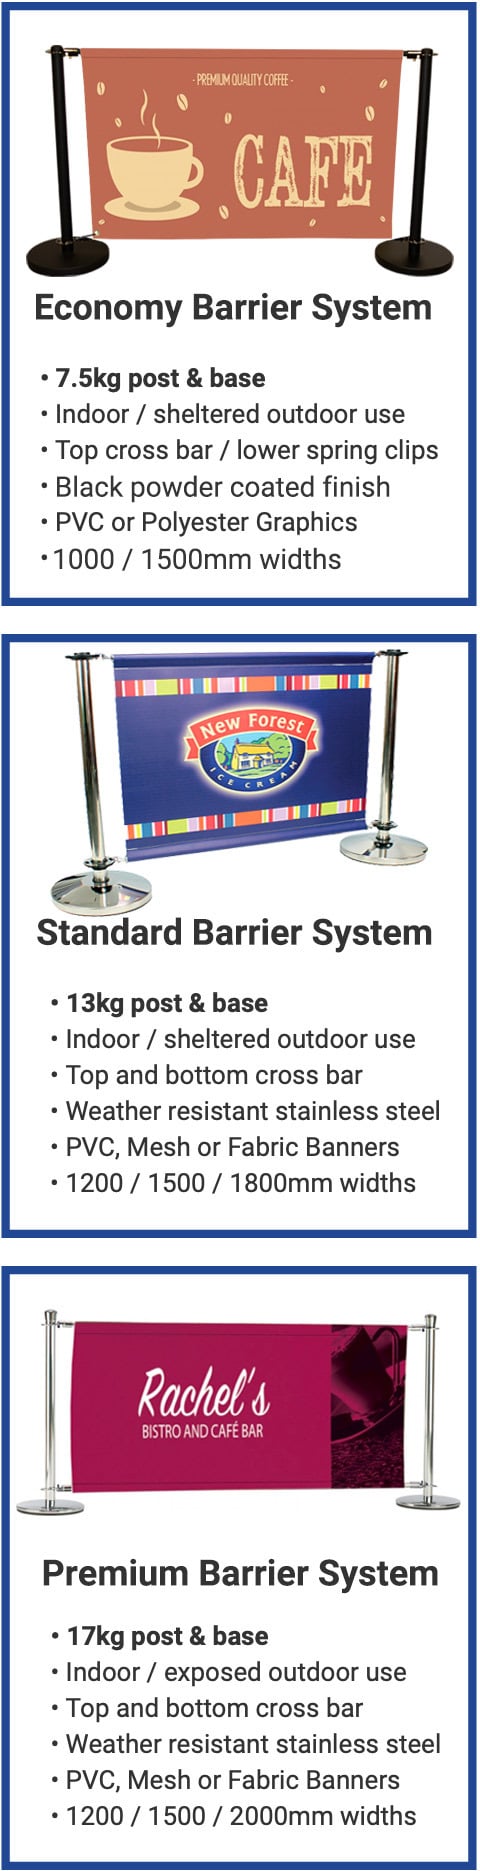 Overview of three distinct cafe barrier hardware options